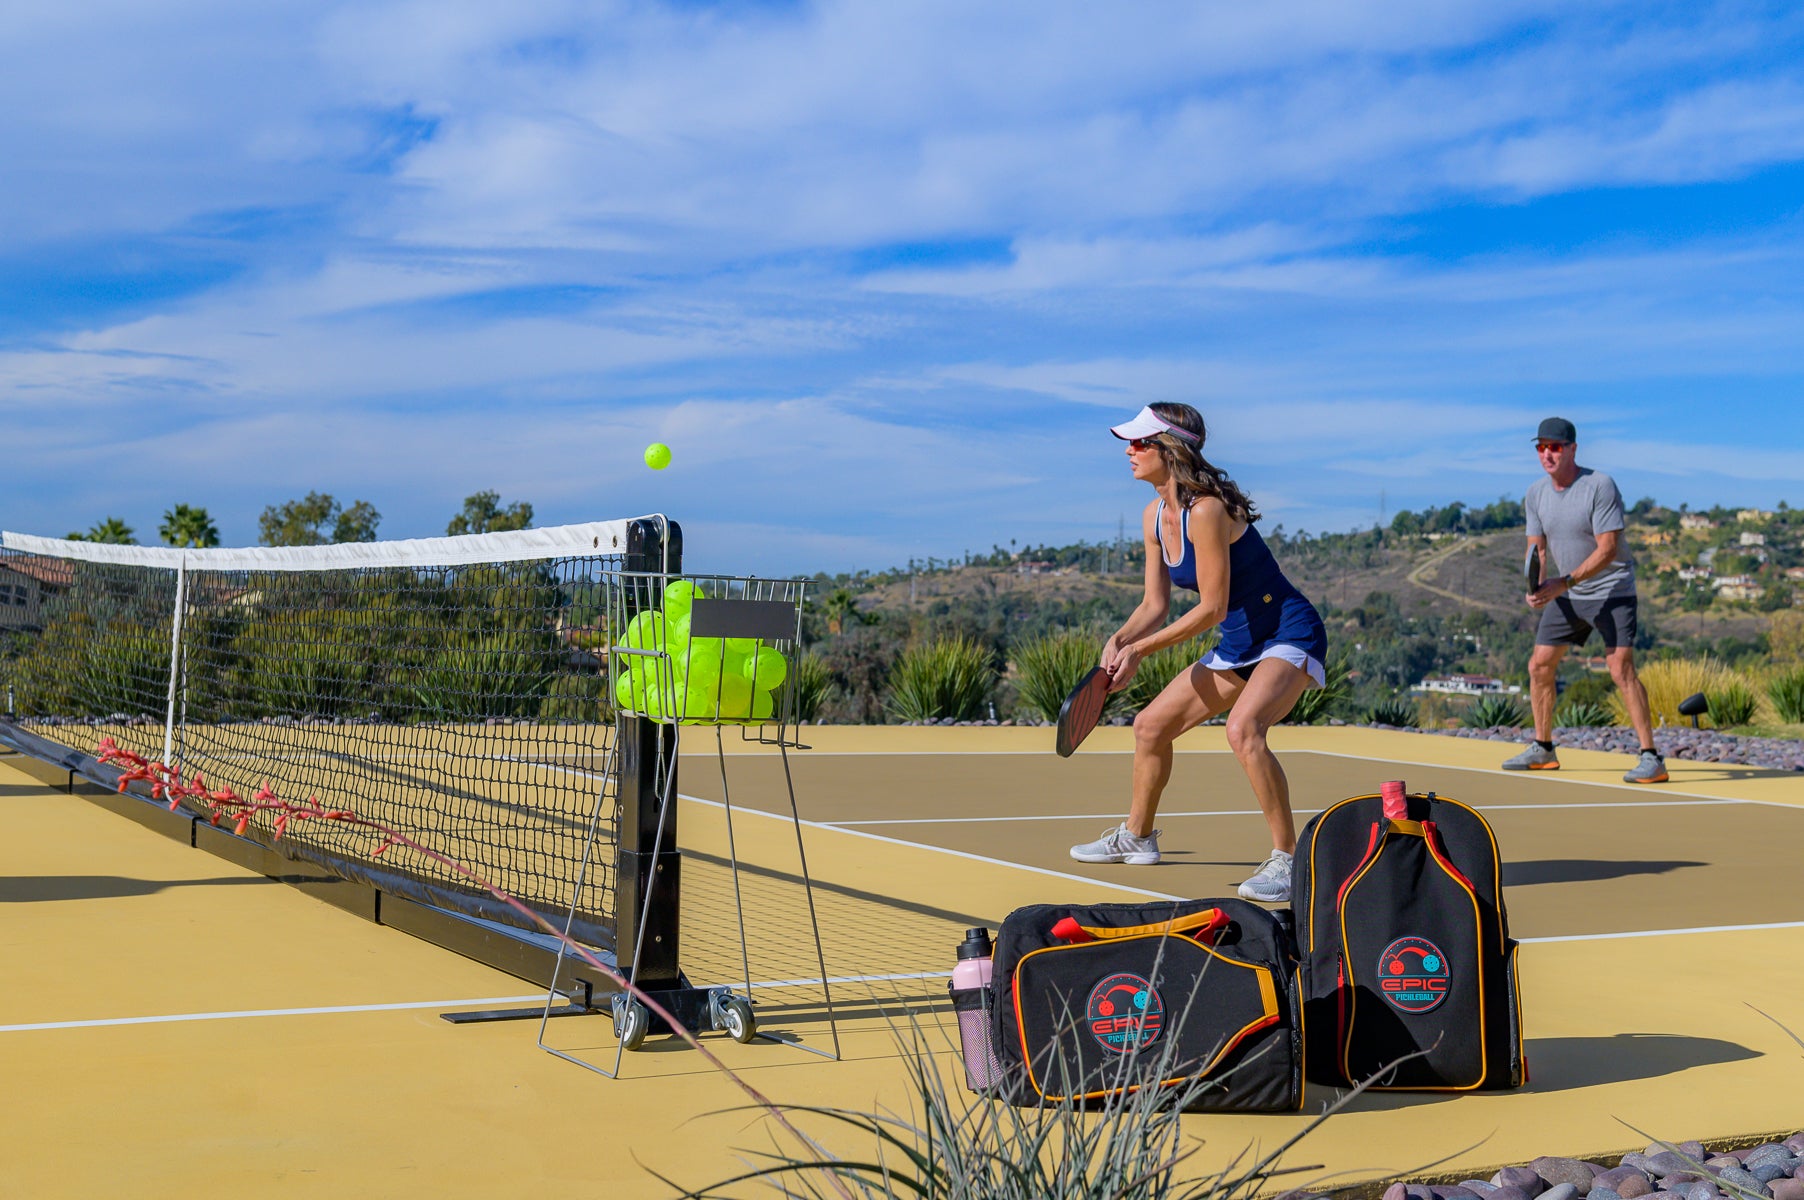 Meet the Modern Pickleball Player: Style, Function, and Community